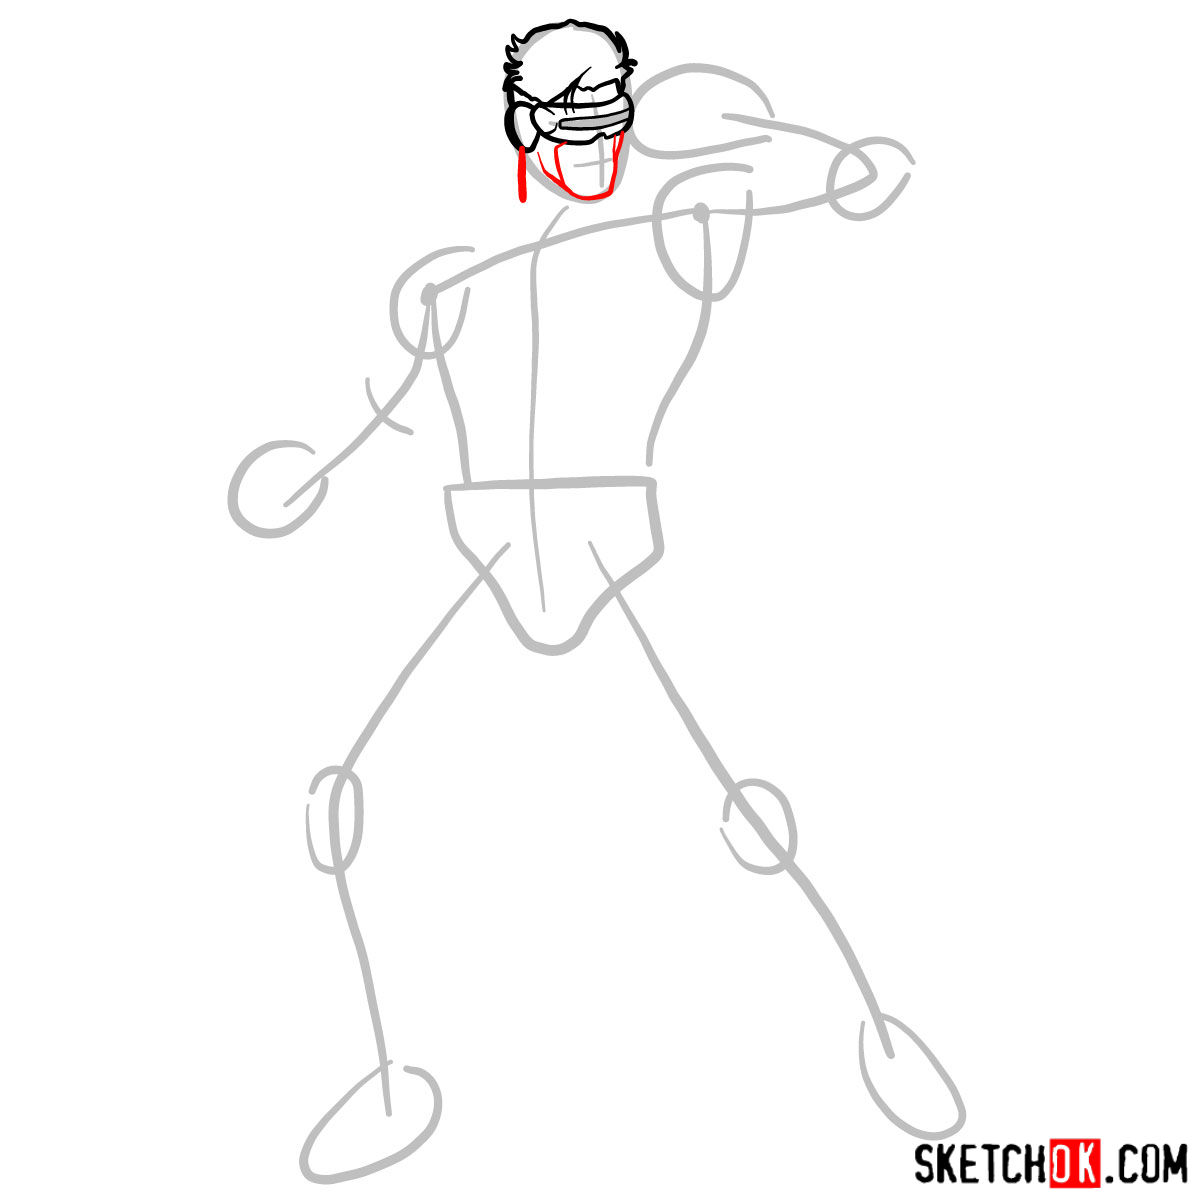 How to draw Cyclops from X-Men - step 04